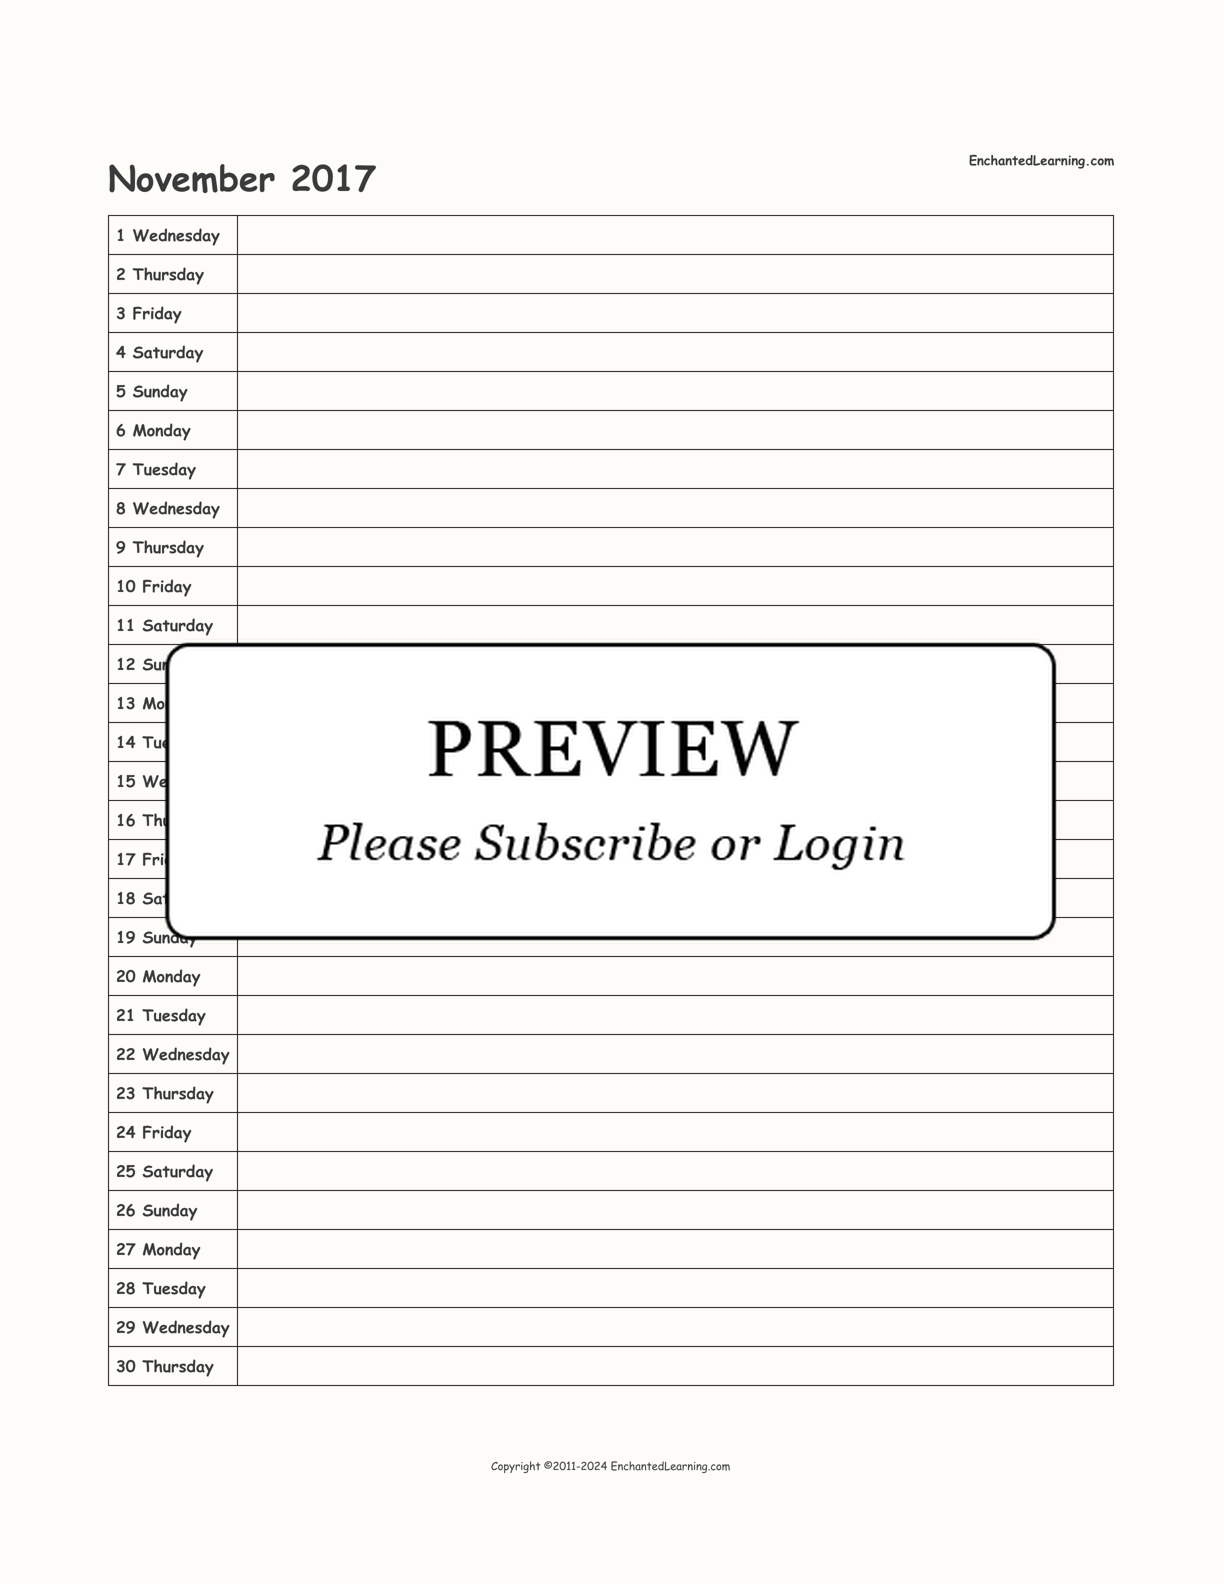 2017 Scheduling Calendar interactive printout page 11